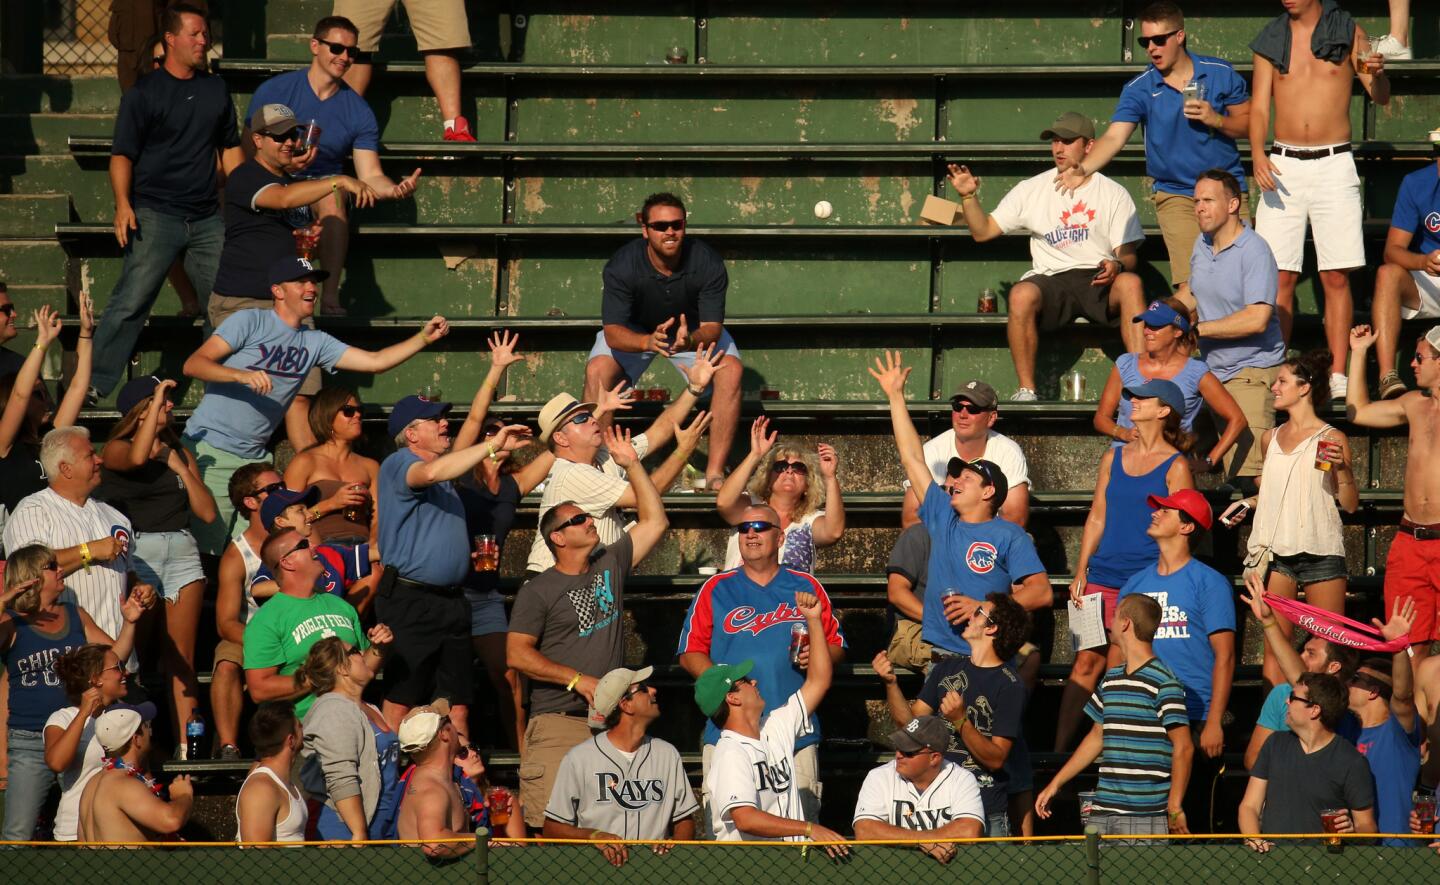 Cubs vs. Rays